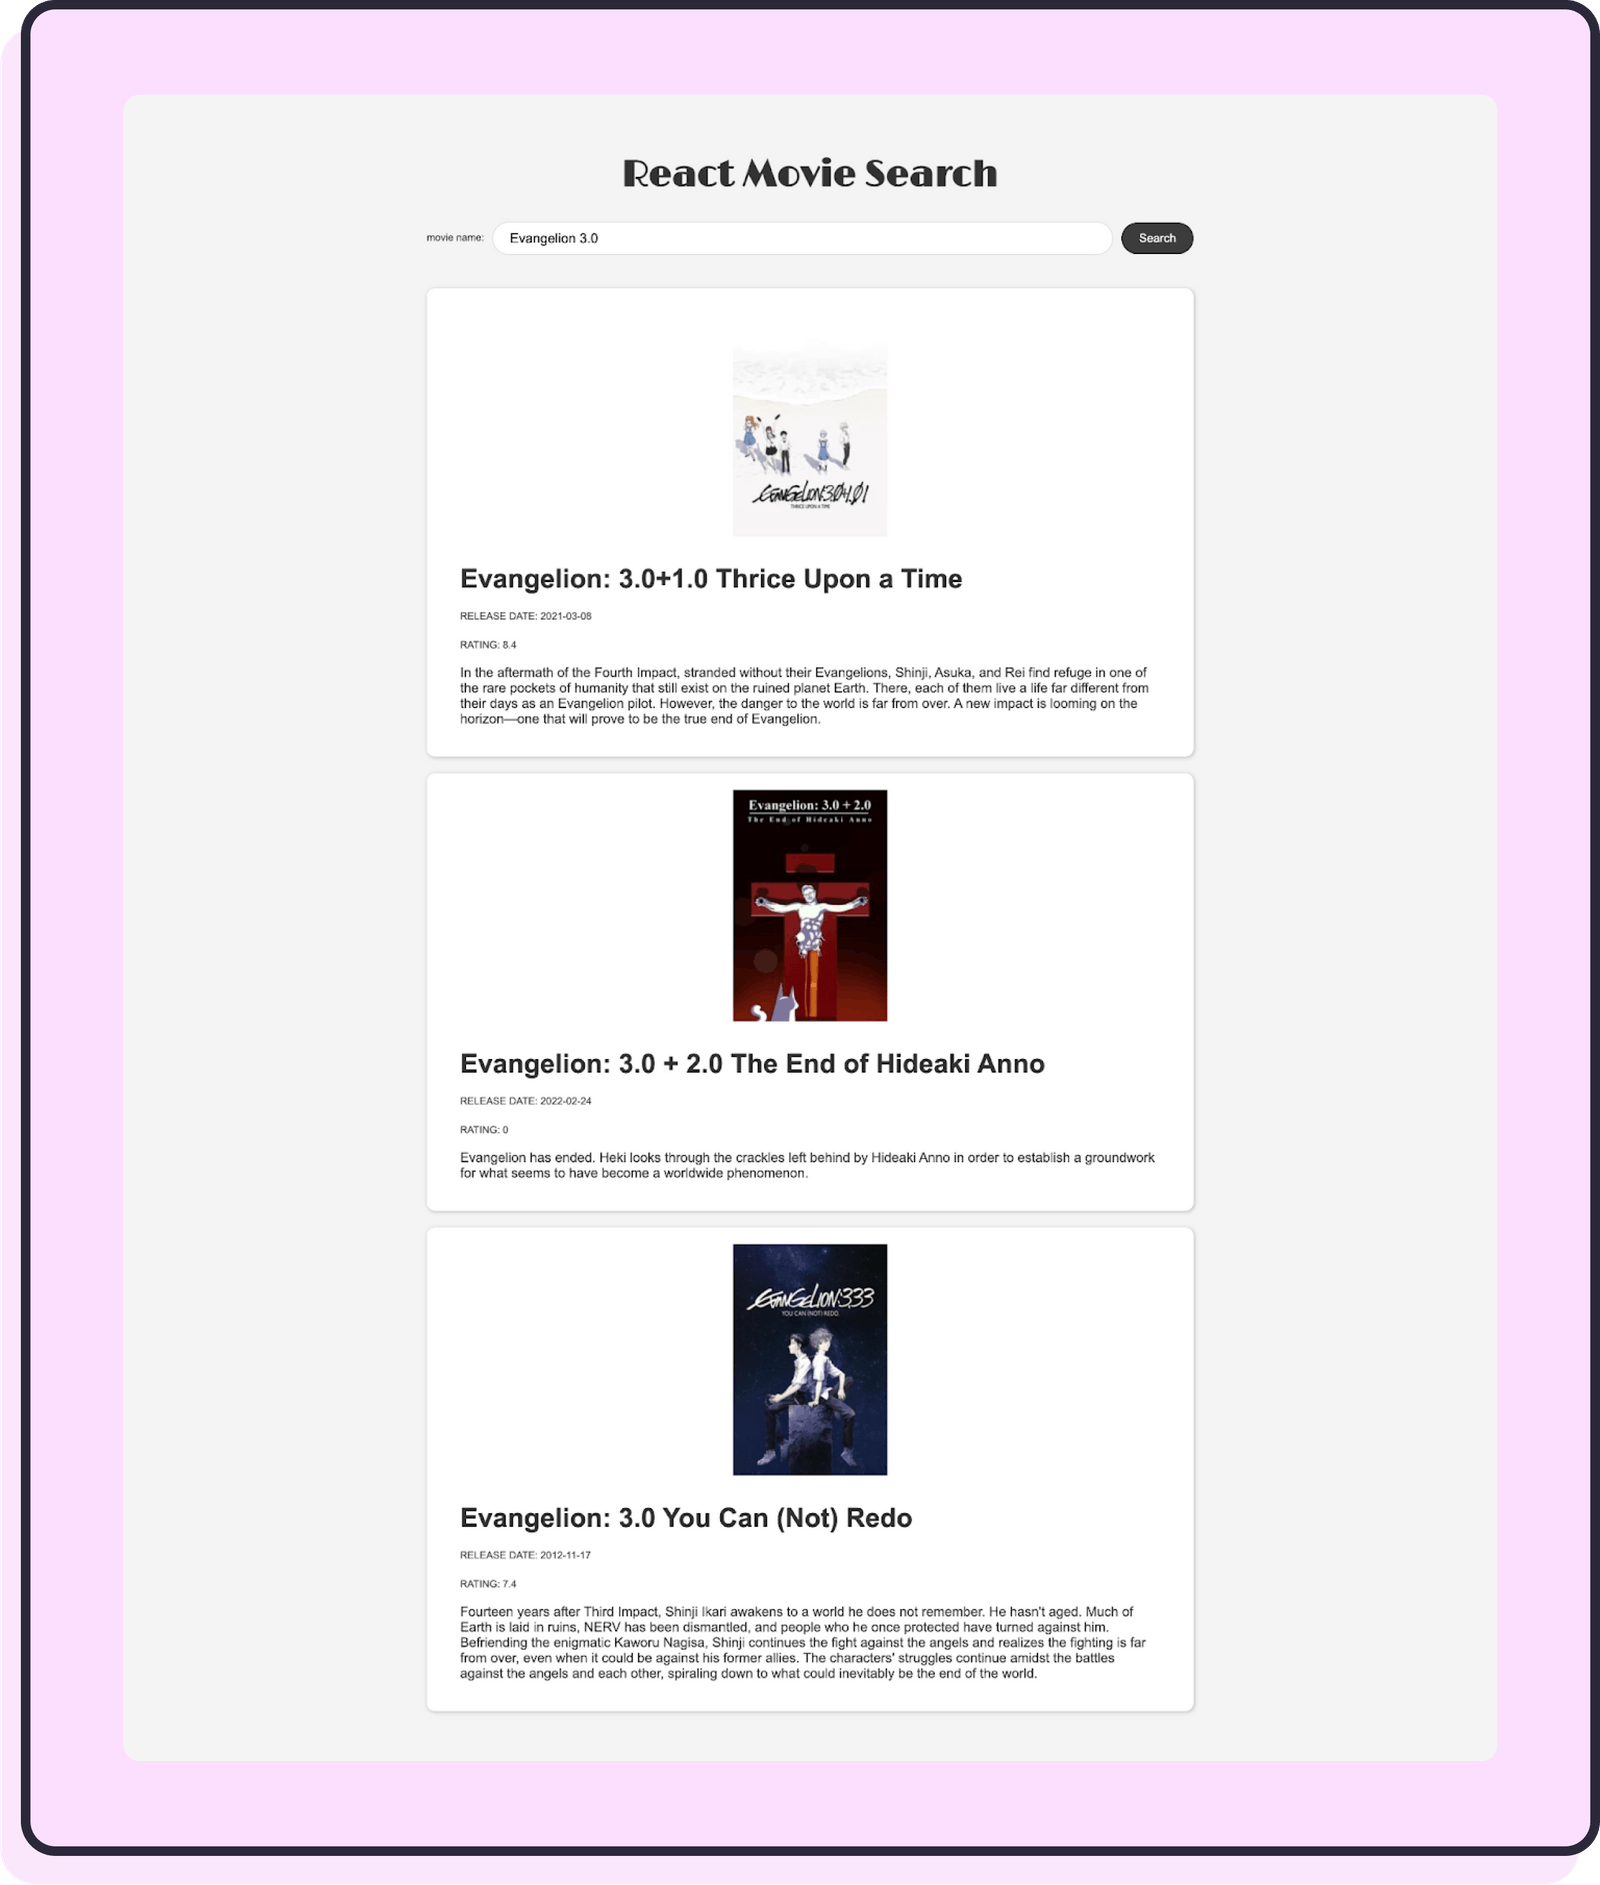 A website entitled “React Movie Search” displaying results for the search “Evangelion 3.0”. Each result has the movie poster, title, release date, rating, and description.